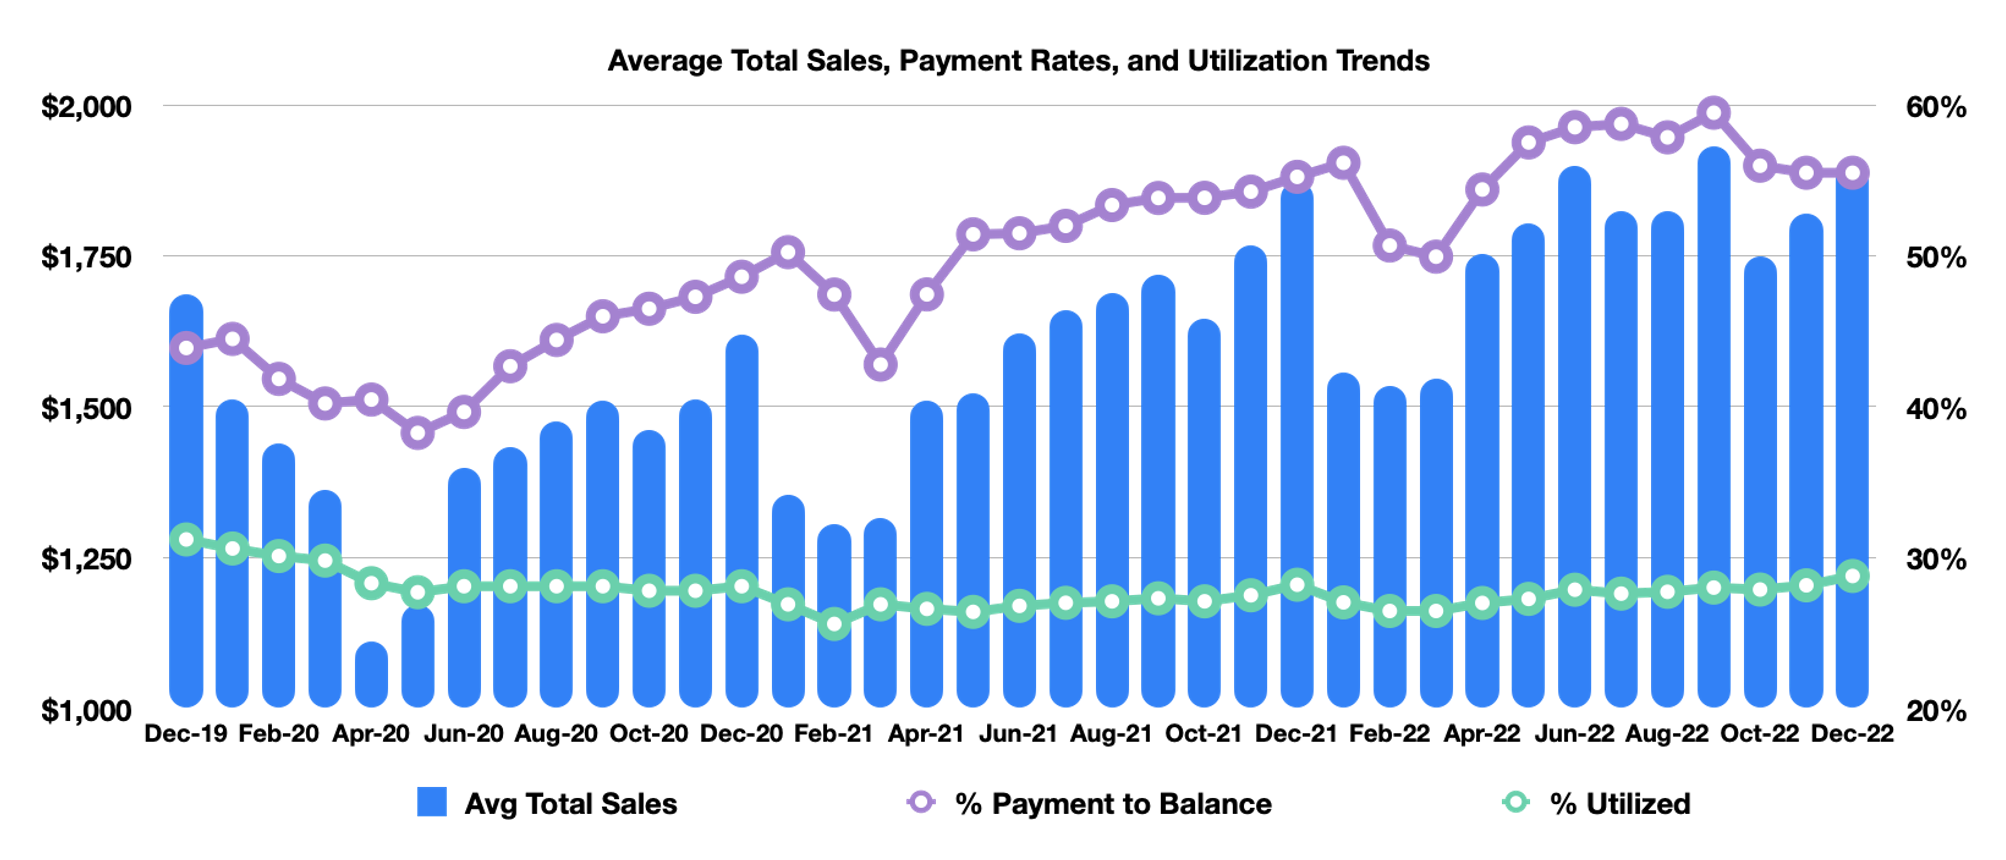 Average Total Sales, Credit Card Payment Rates, and Credit Utilization Trends in Canada